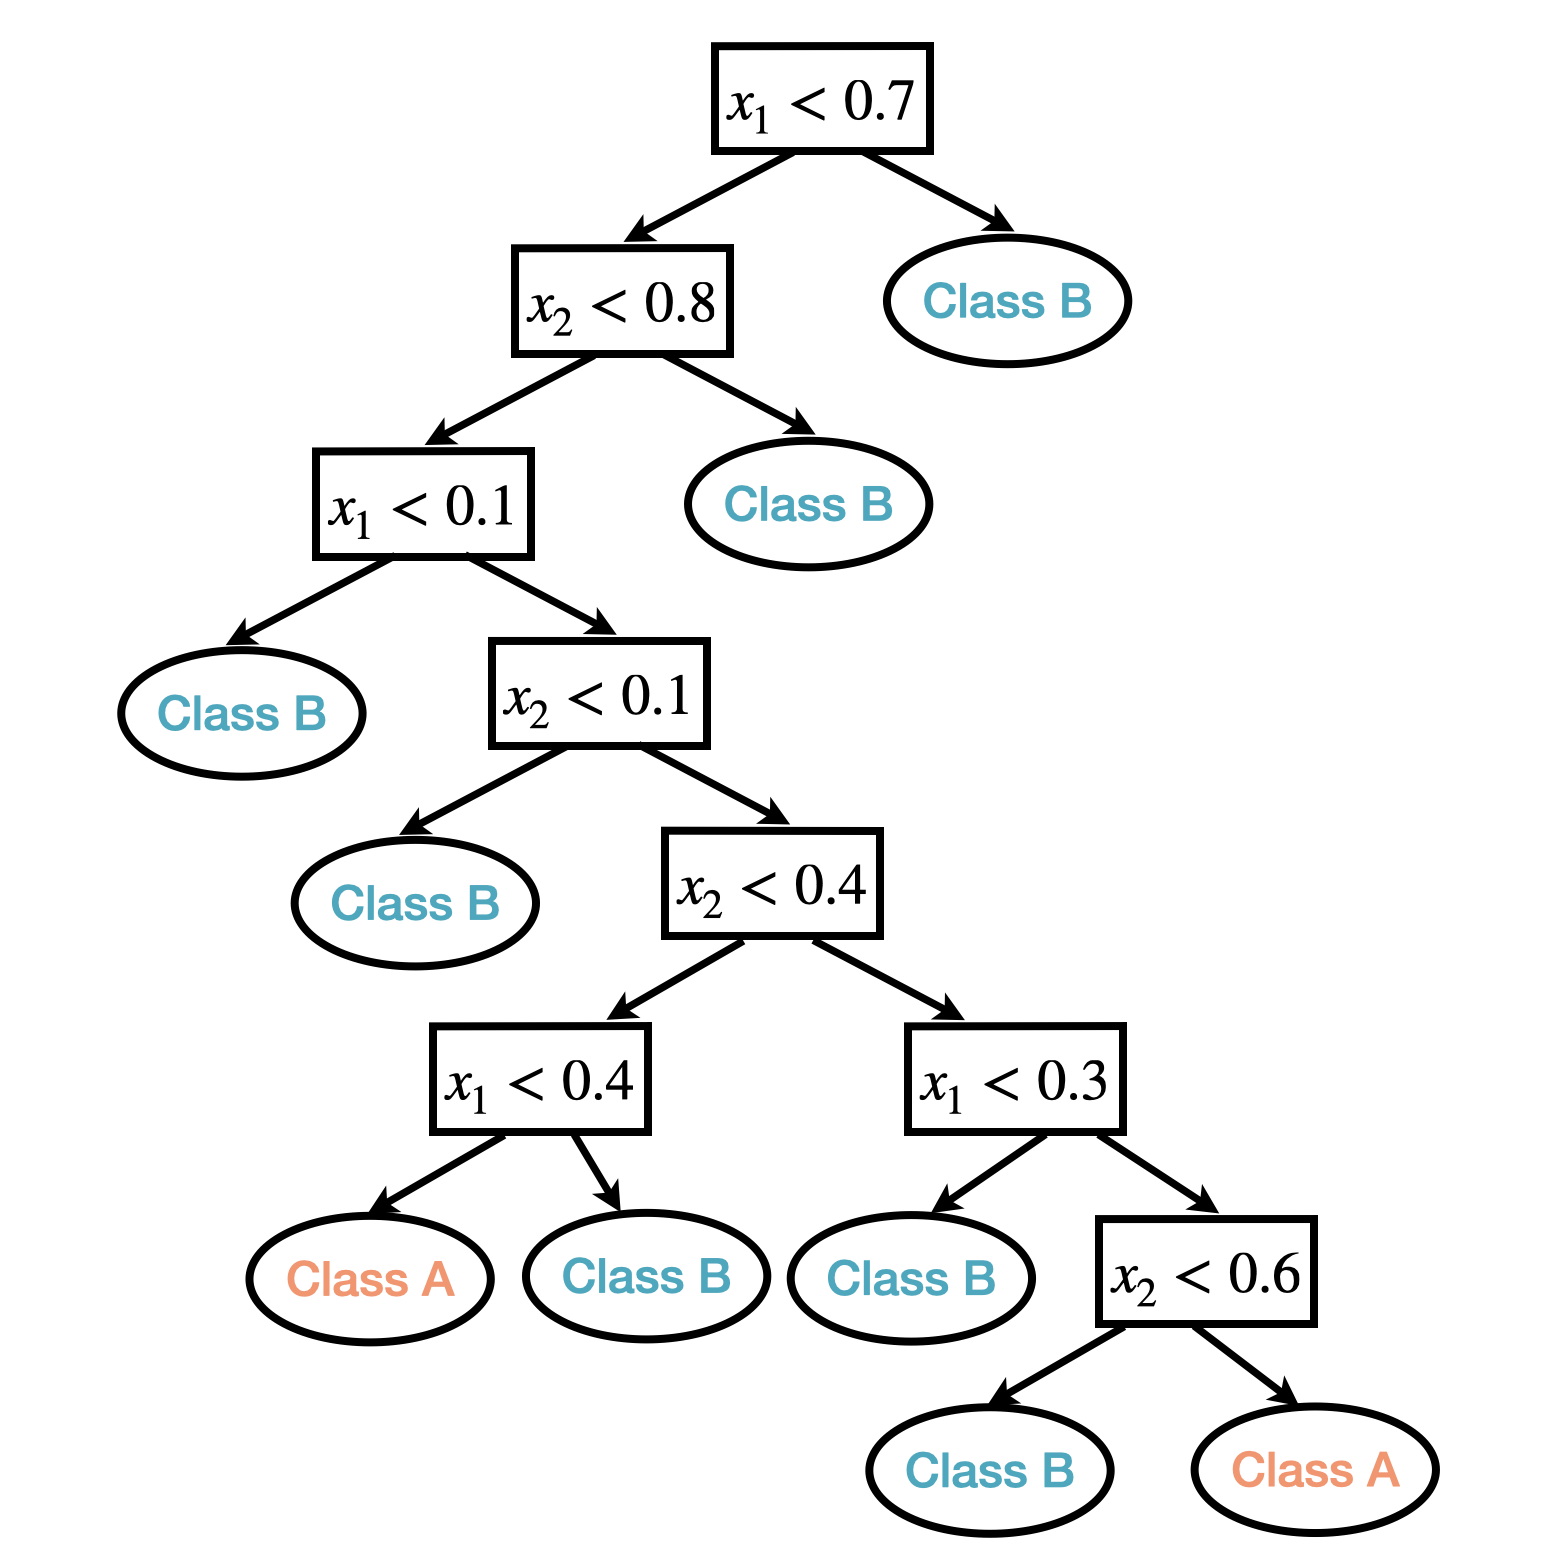 An example of classification tree based one two predictors.